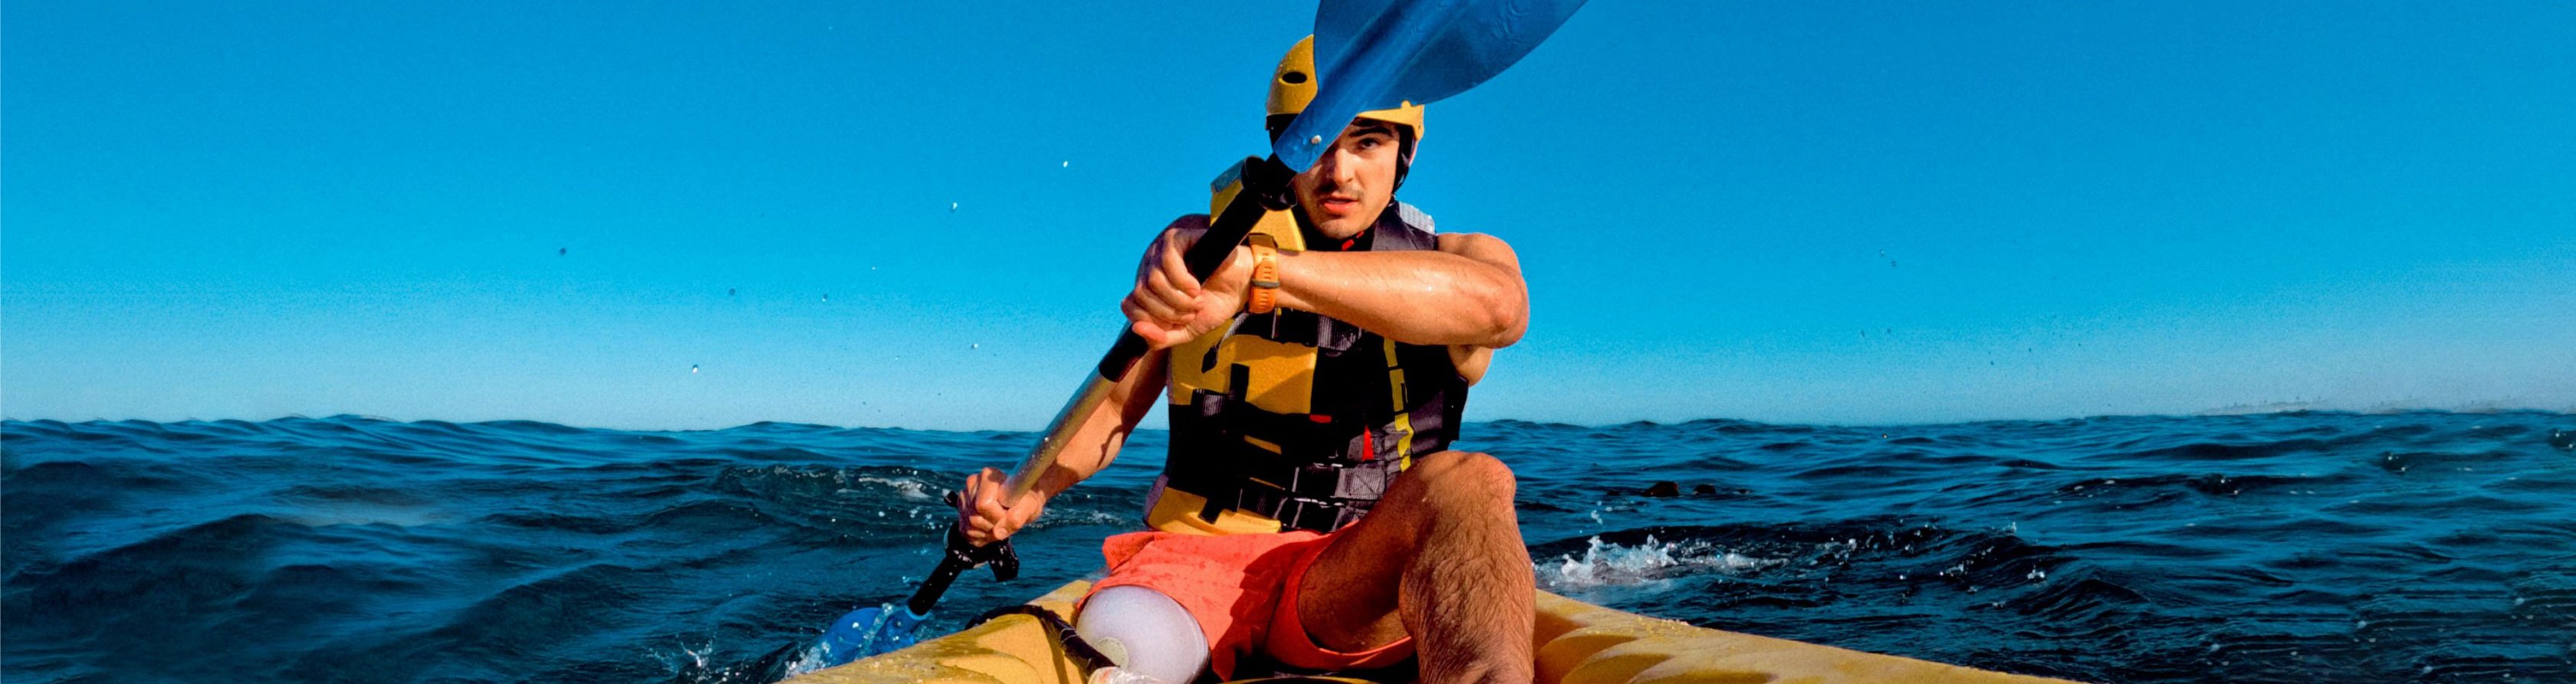 Para-athlete missing right leg paddles a canoe on the sea